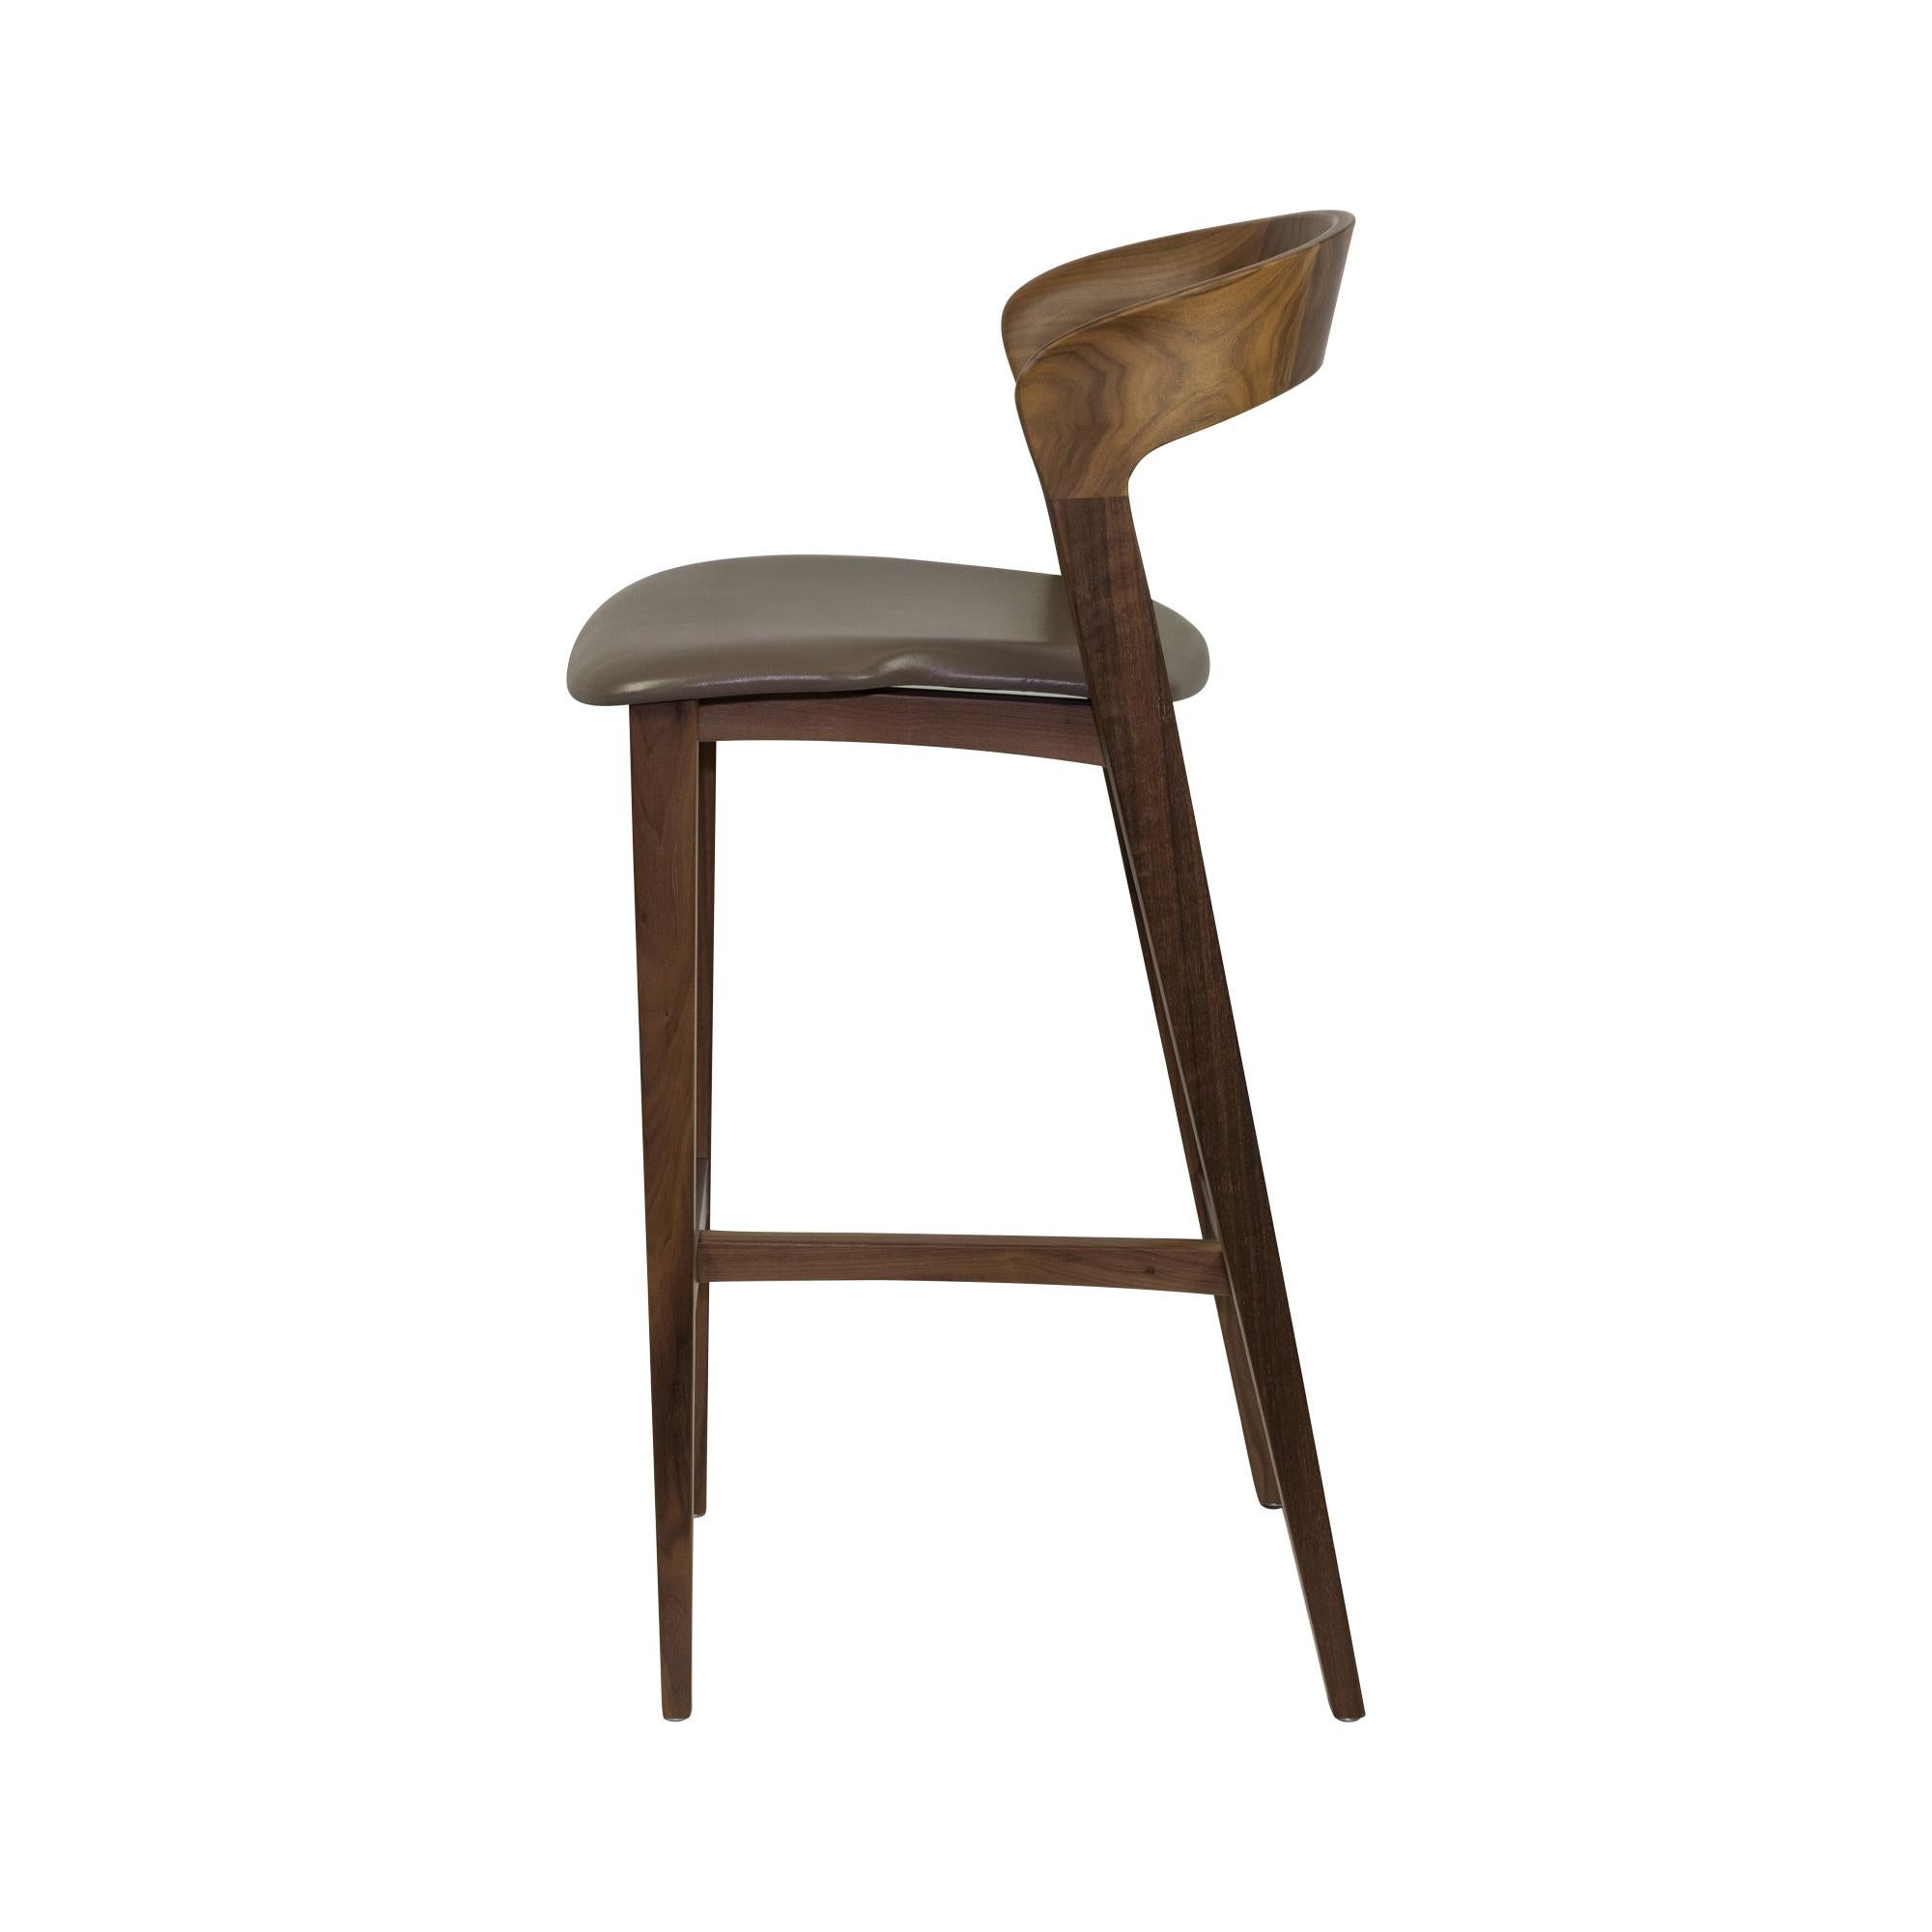 Bar stool with elegantly curved back and tapered legs in shown in solid walnut with a leather seat.
Available in counter or bar height. Available in other woods, stain colors, COM fabric and leathers.